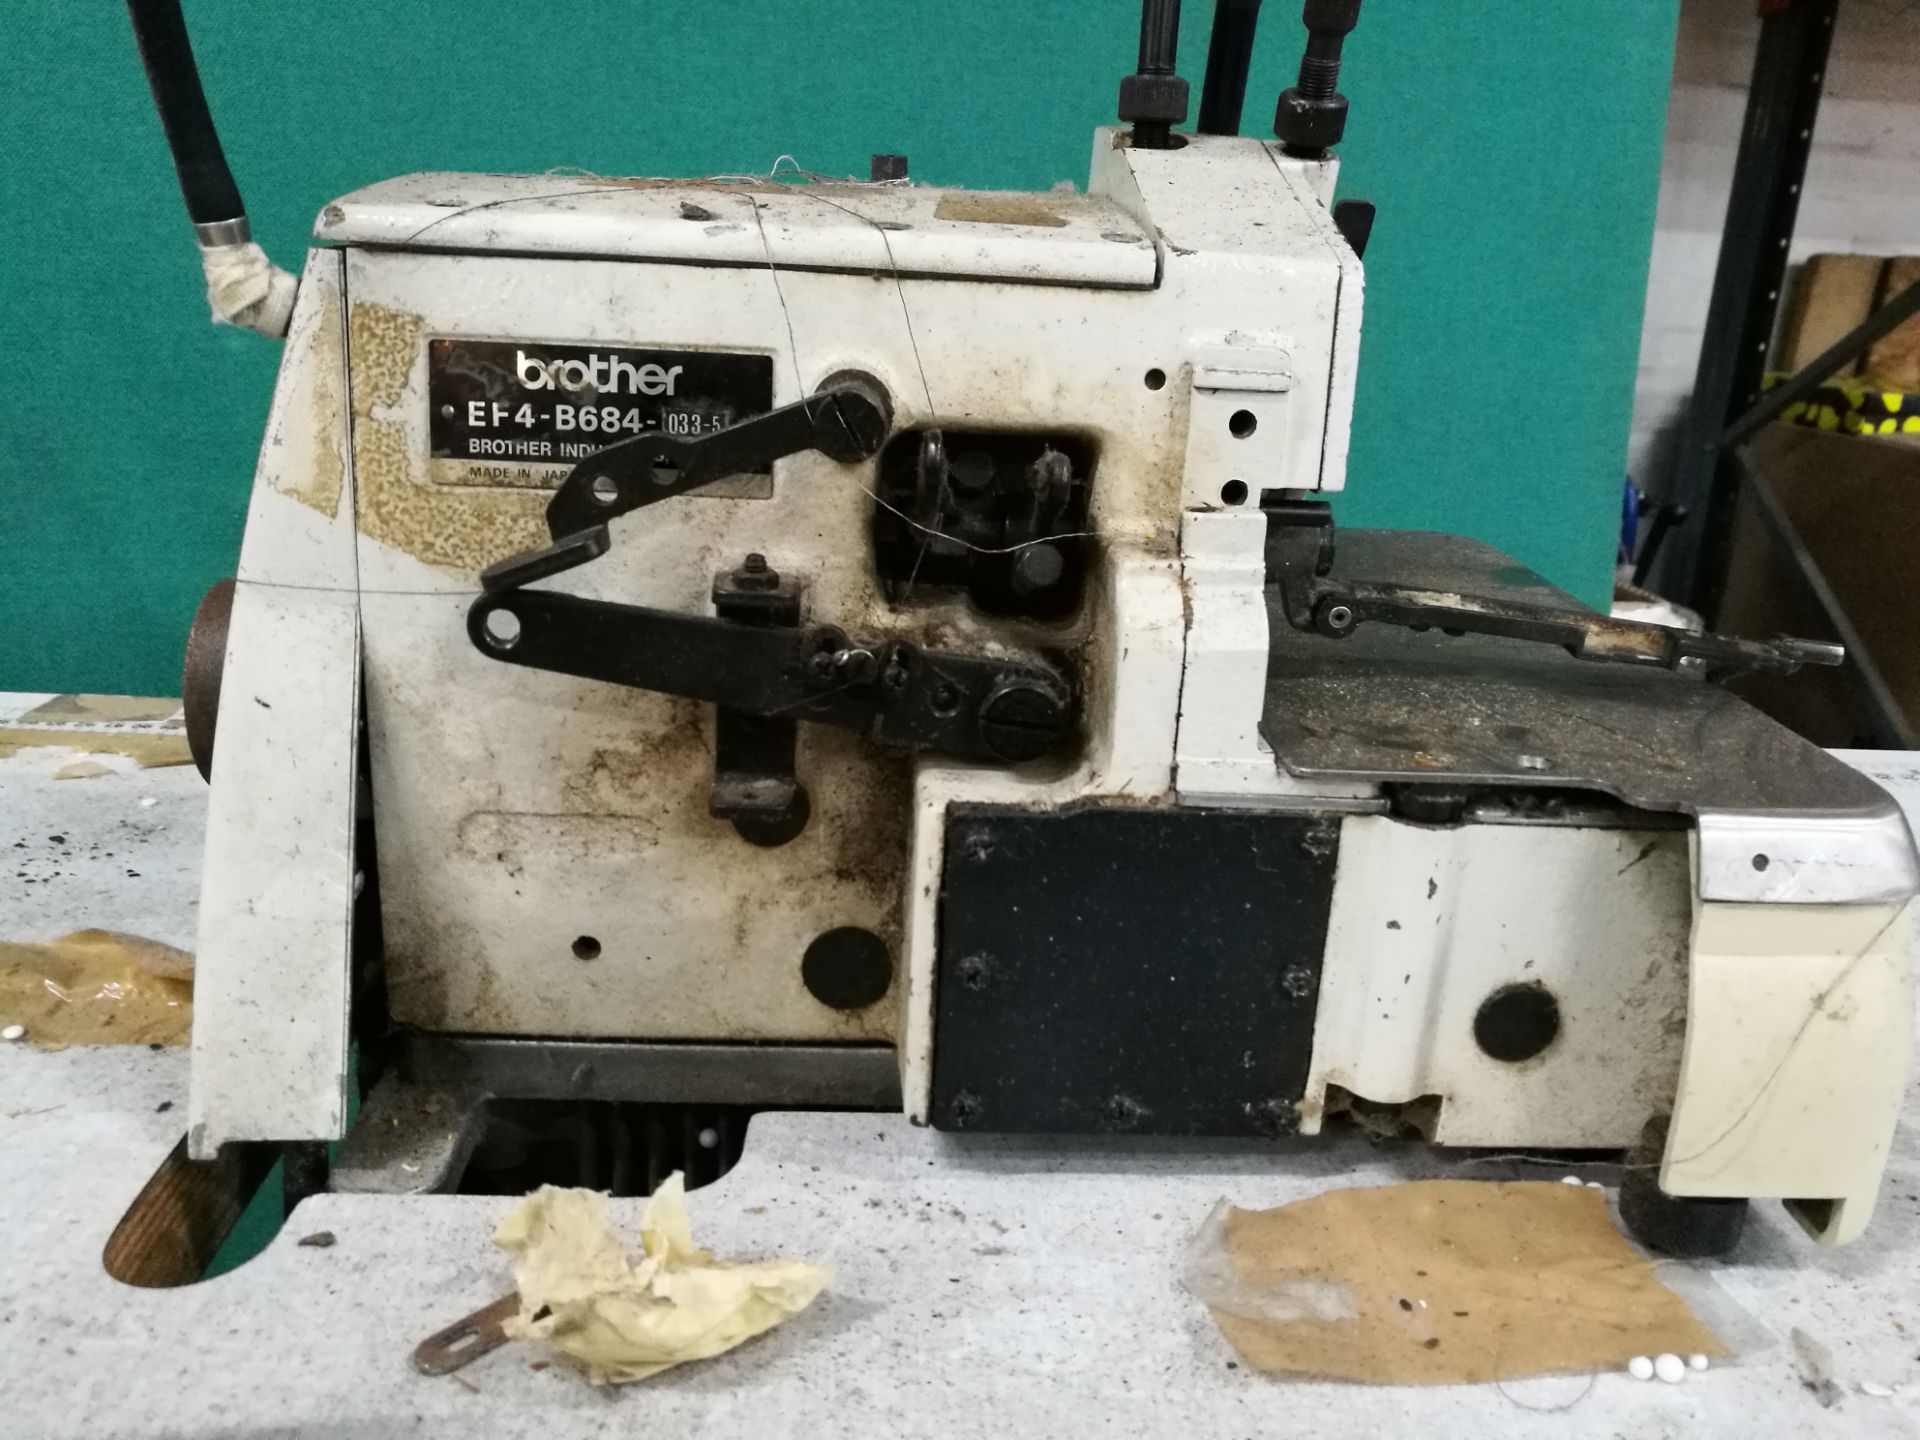 BROTHER EF4-B684-033-5 INDUSTRIAL SEWING MACHINE - Image 2 of 5